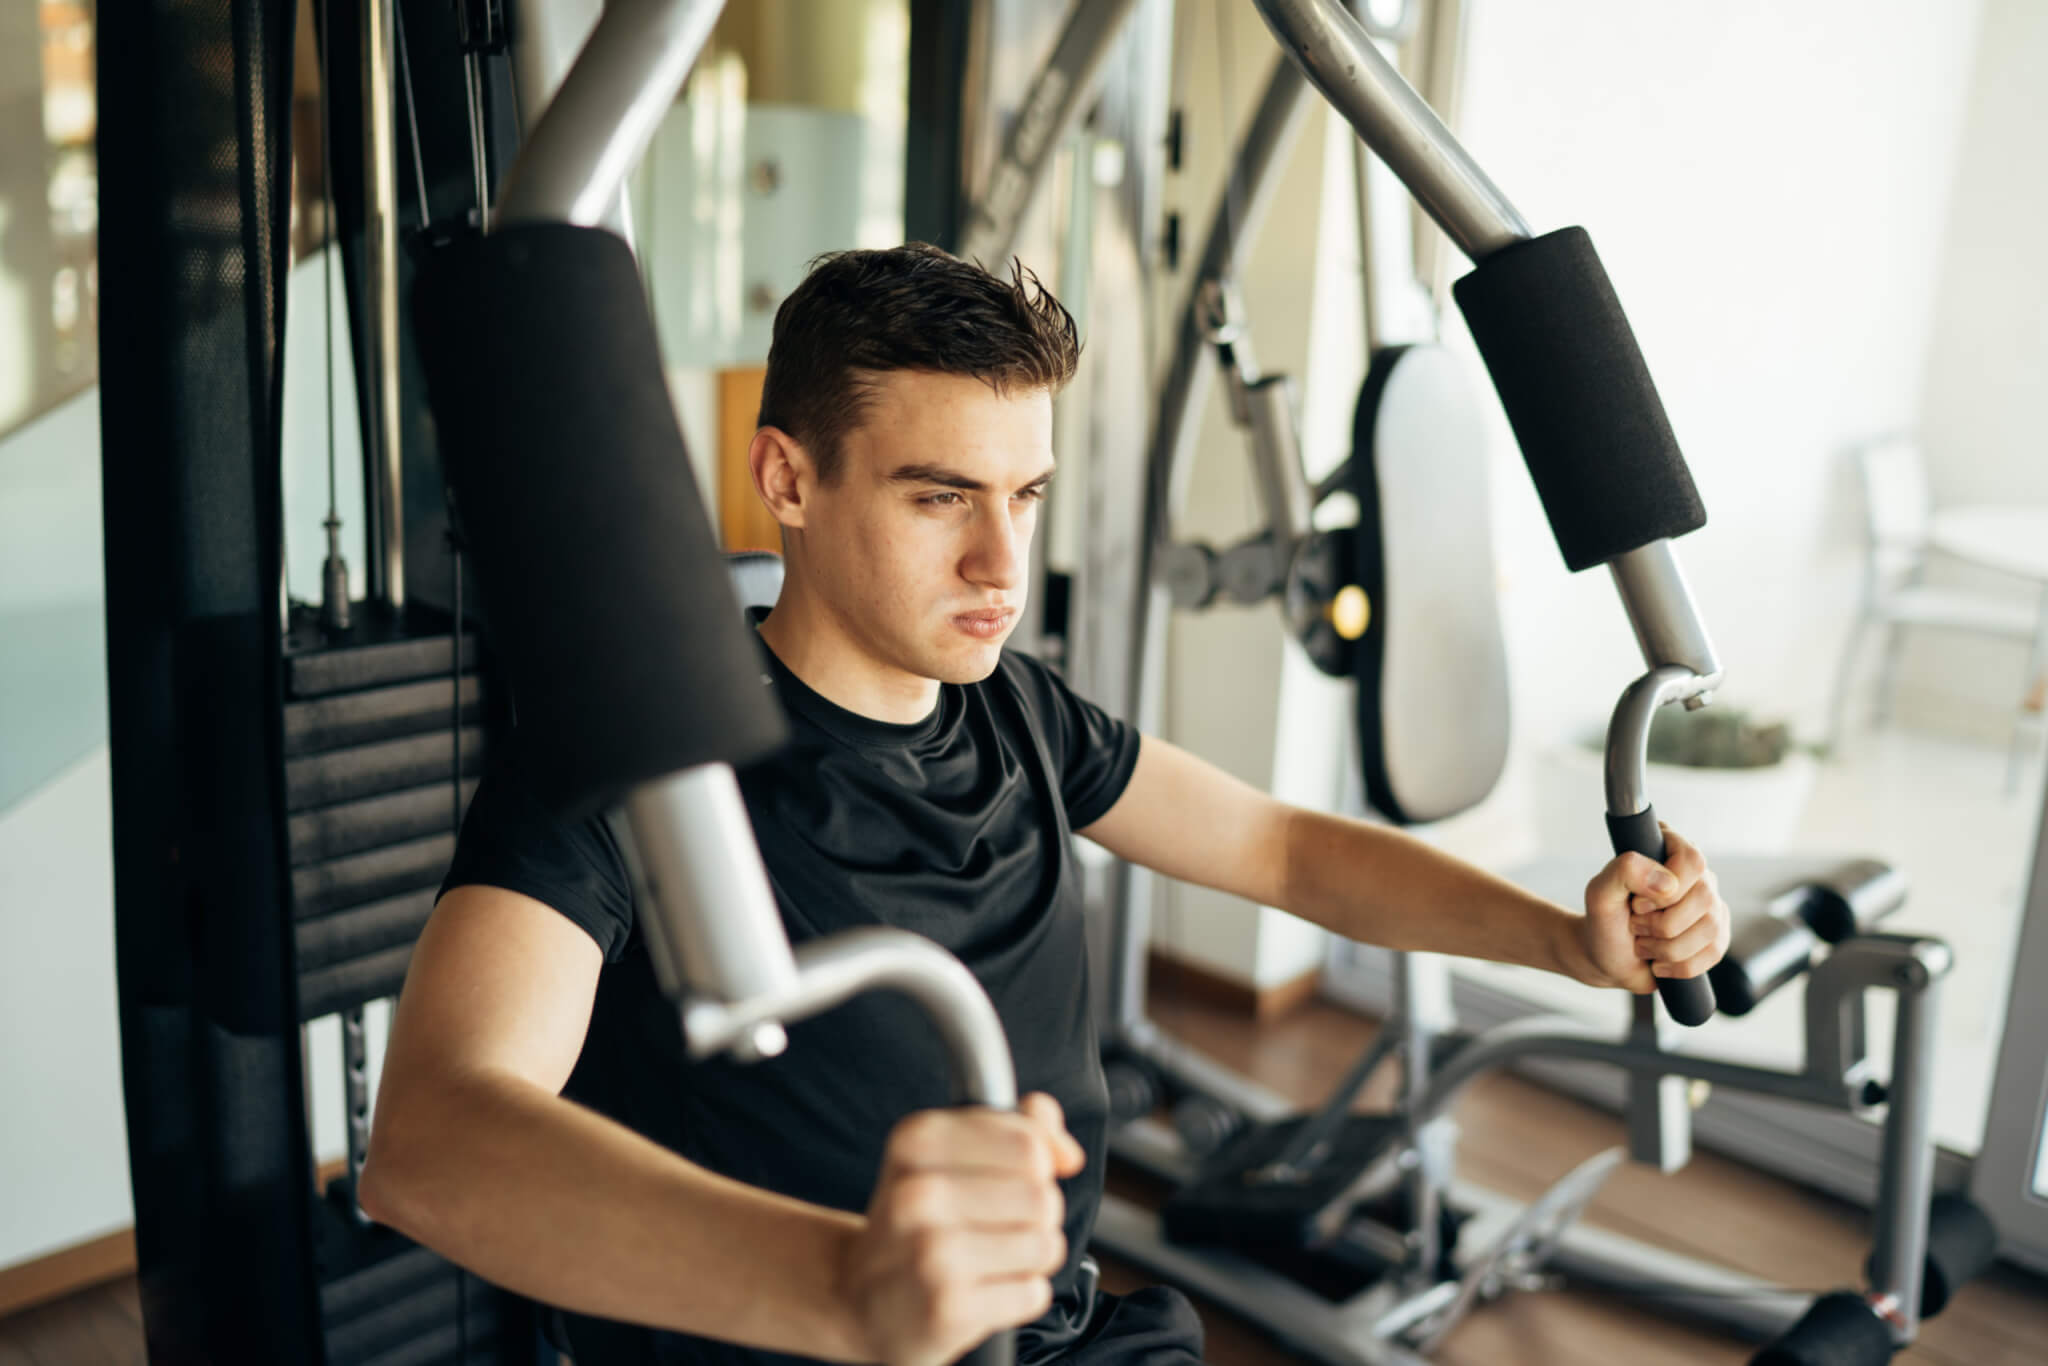 Best Of The Best Home Gyms For 2023: These 5 Trainers Are Most Recommended  By Fitness Pros - Study Finds